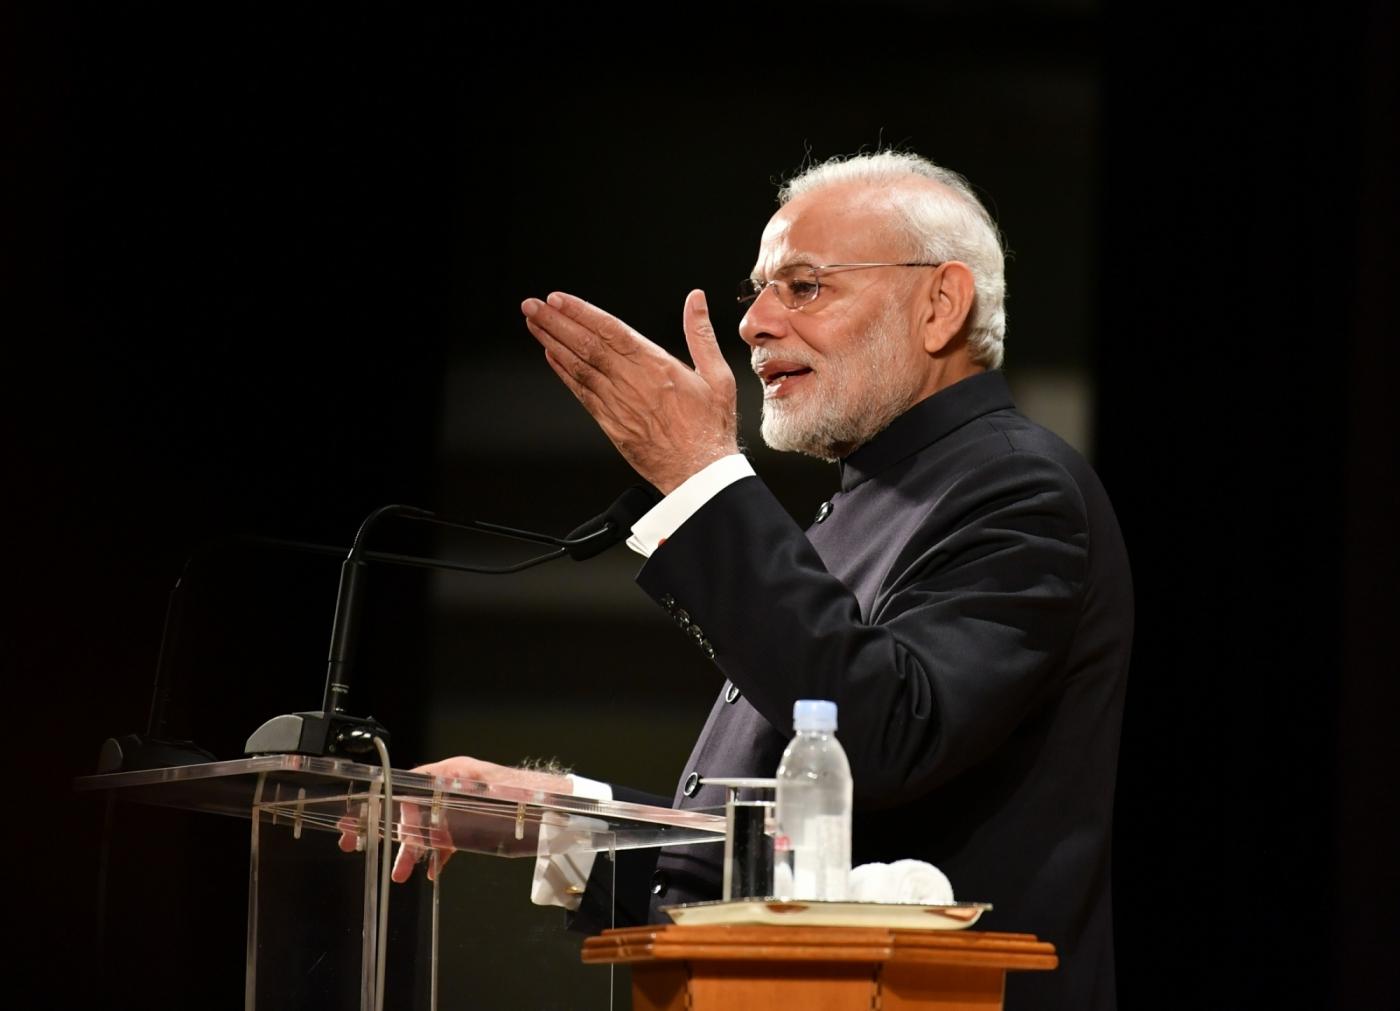 Tokyo: Prime Minister Narendra Modi addresses the Indian community in Tokyo, Japan, on Oct 29, 2018. (Photo: IANS/PIB) by .